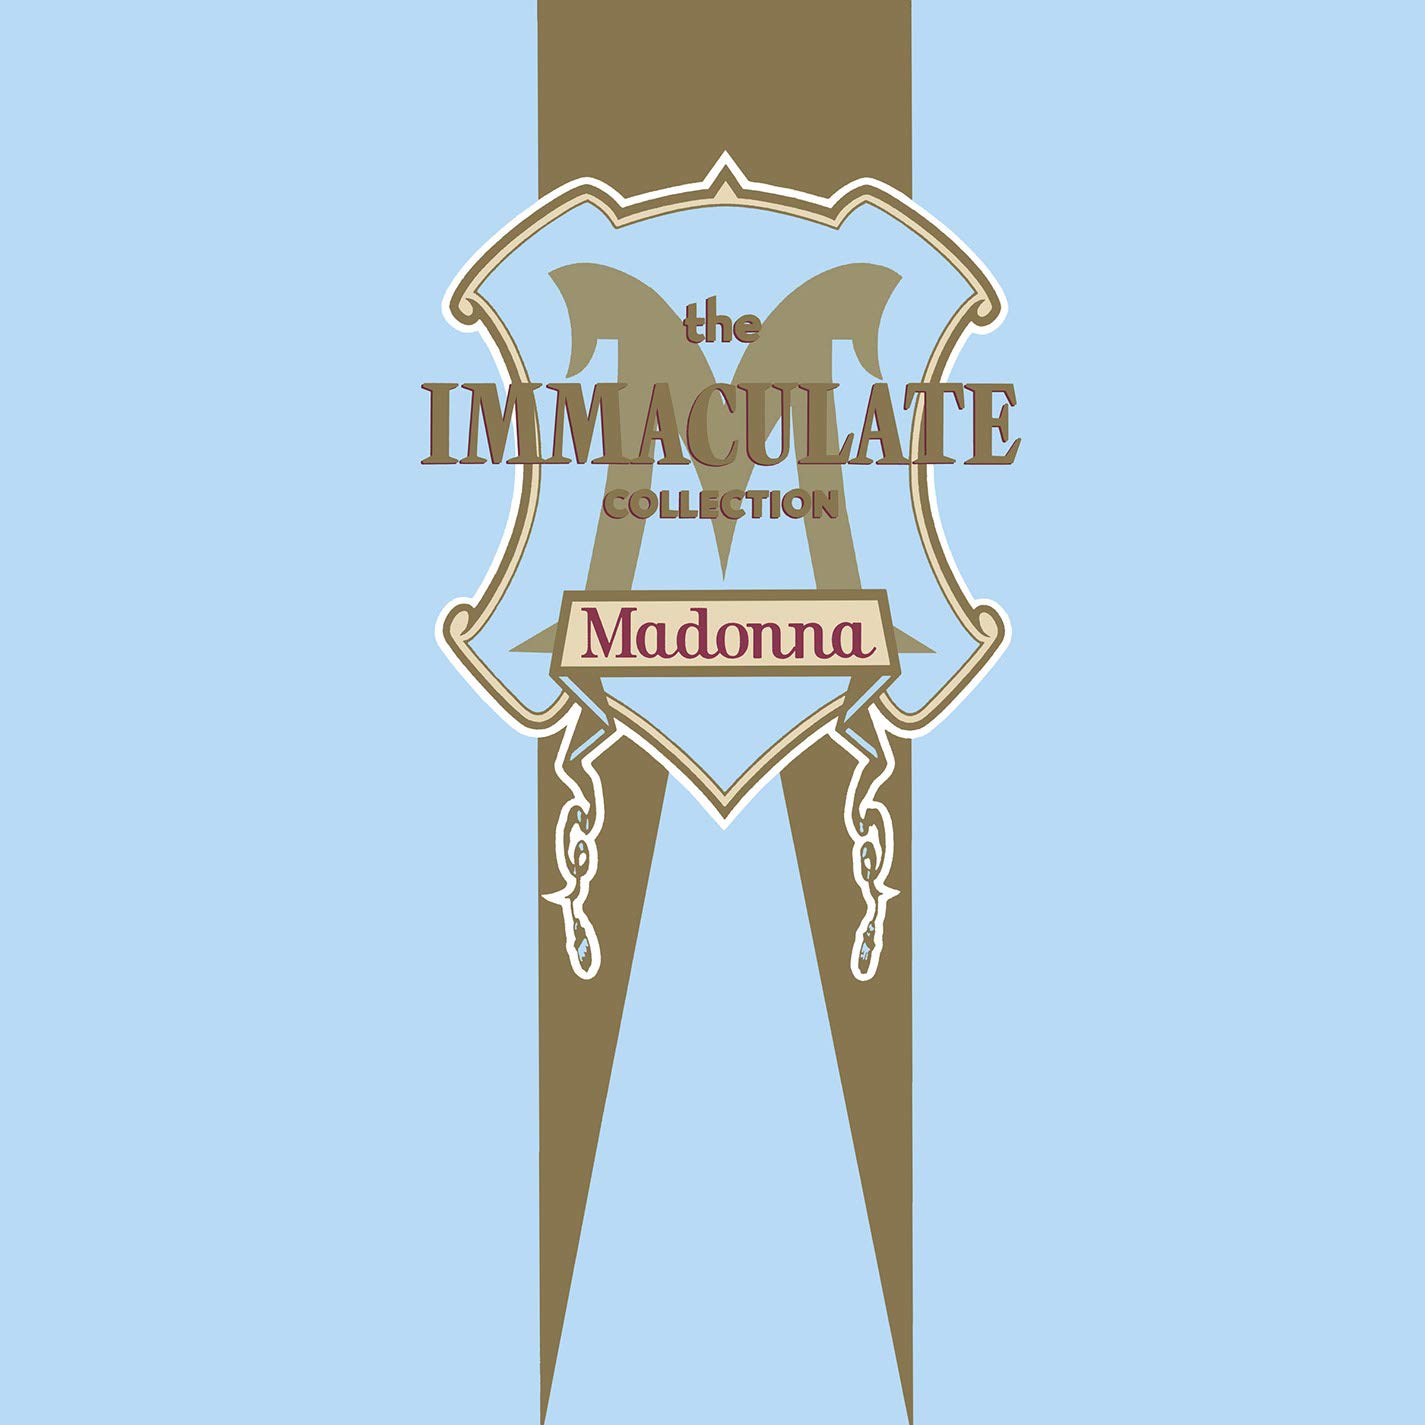 Madonna "The Immaculate Collection" 2LP